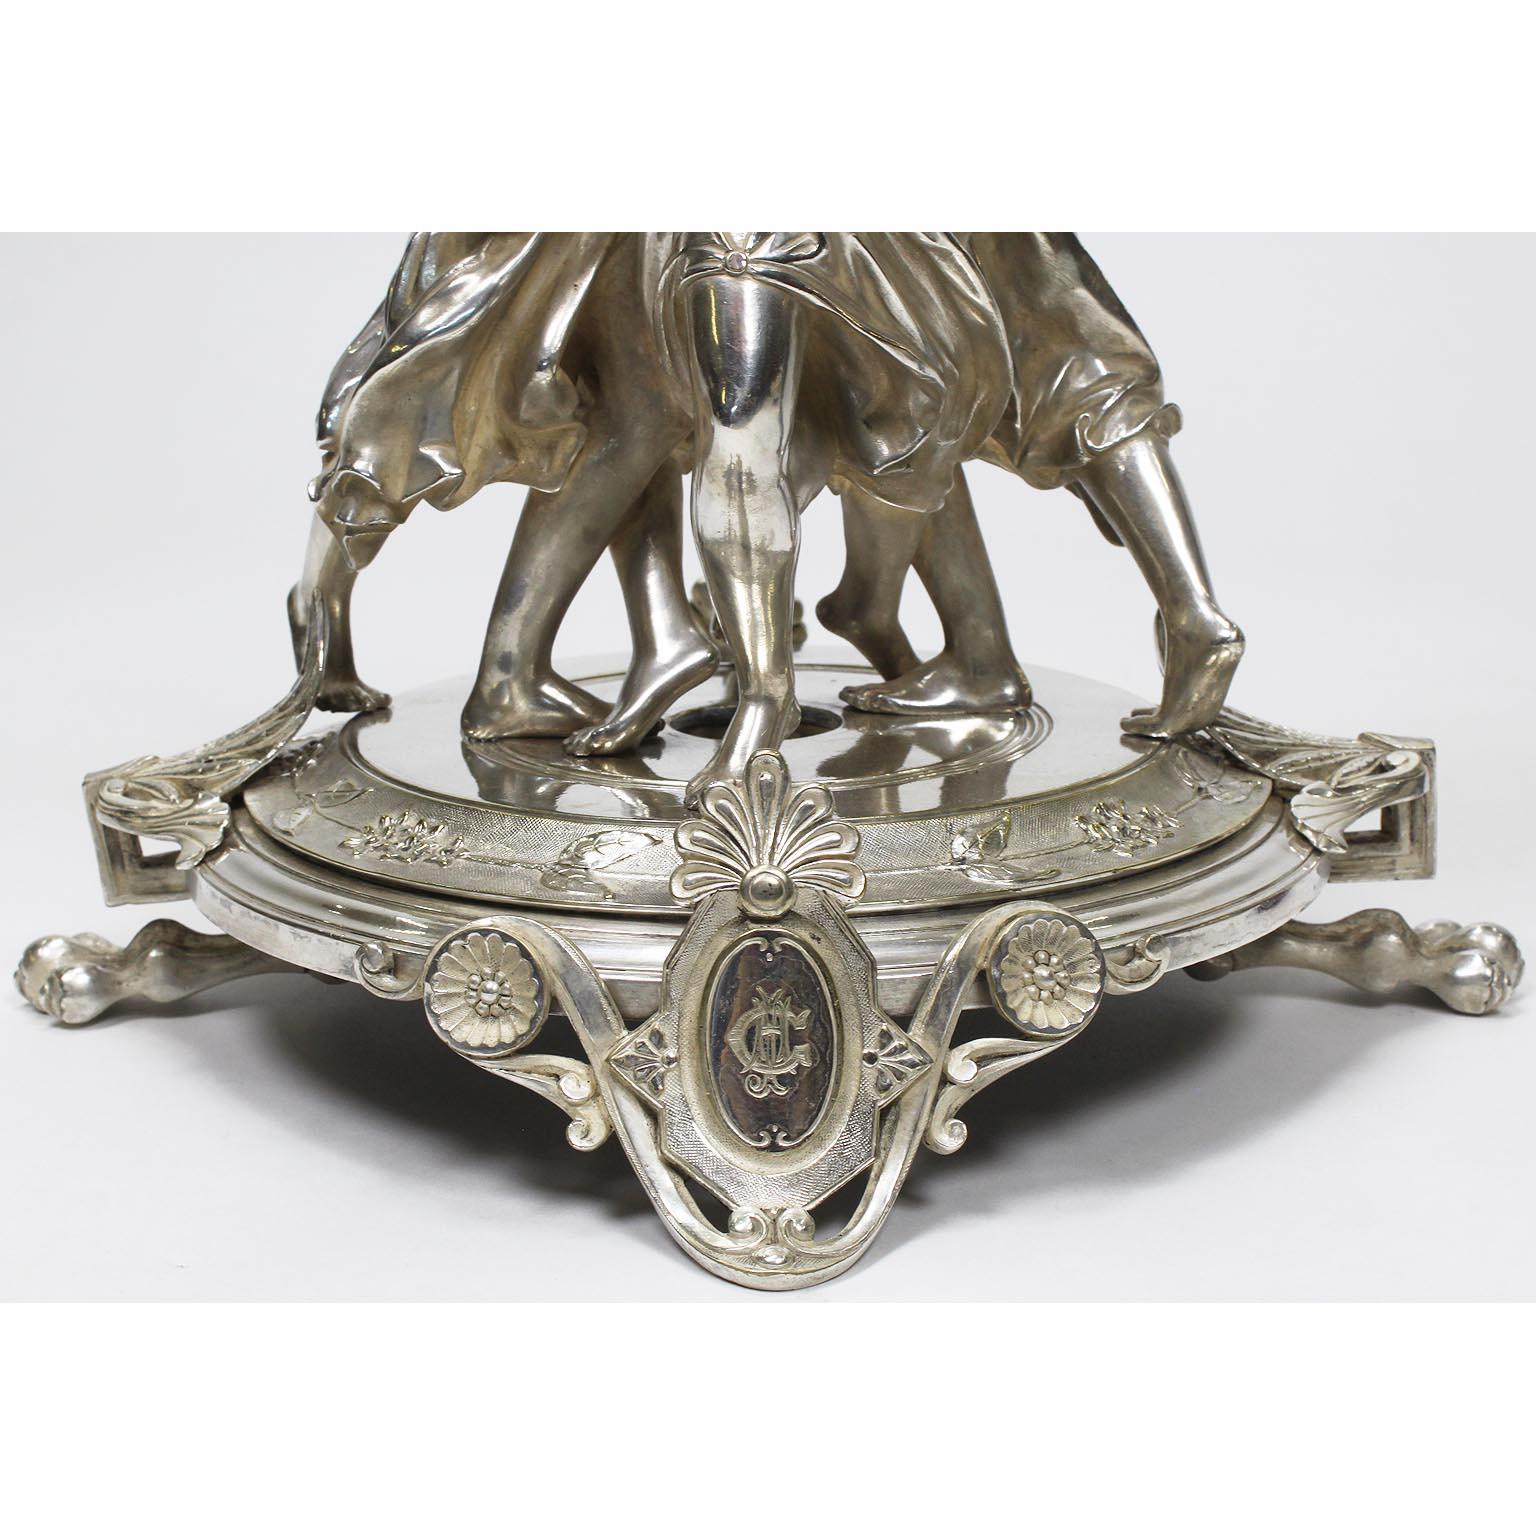 Neoclassical Revival 19th Century Neoclassical Silvered Muses Centerpiece in the Manner of Christofle For Sale